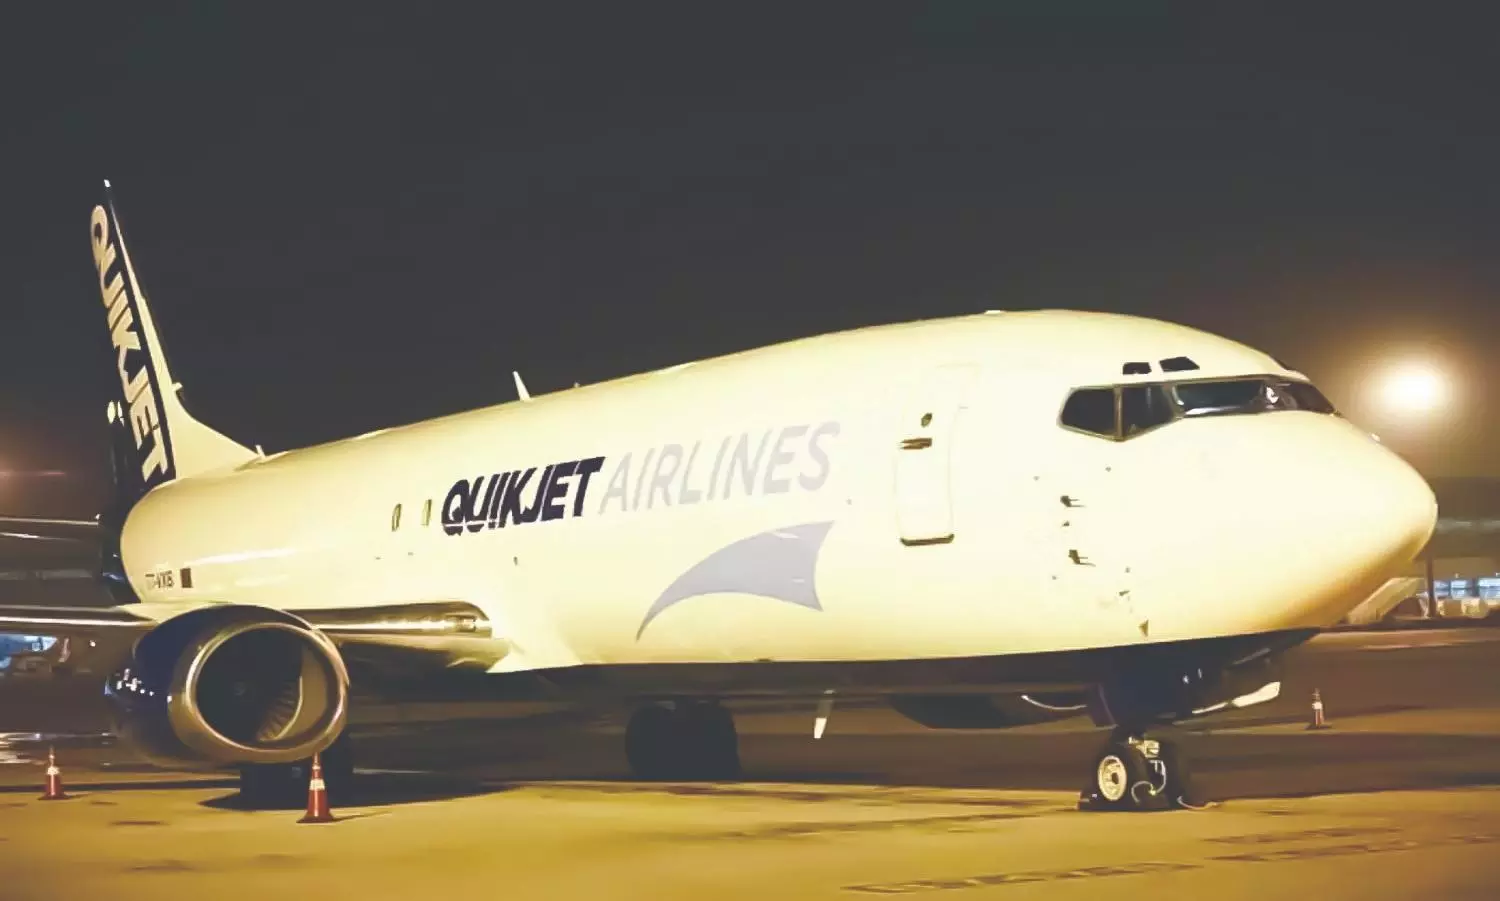 Under new ownership and with new AOC Quickjet resumes operations in India